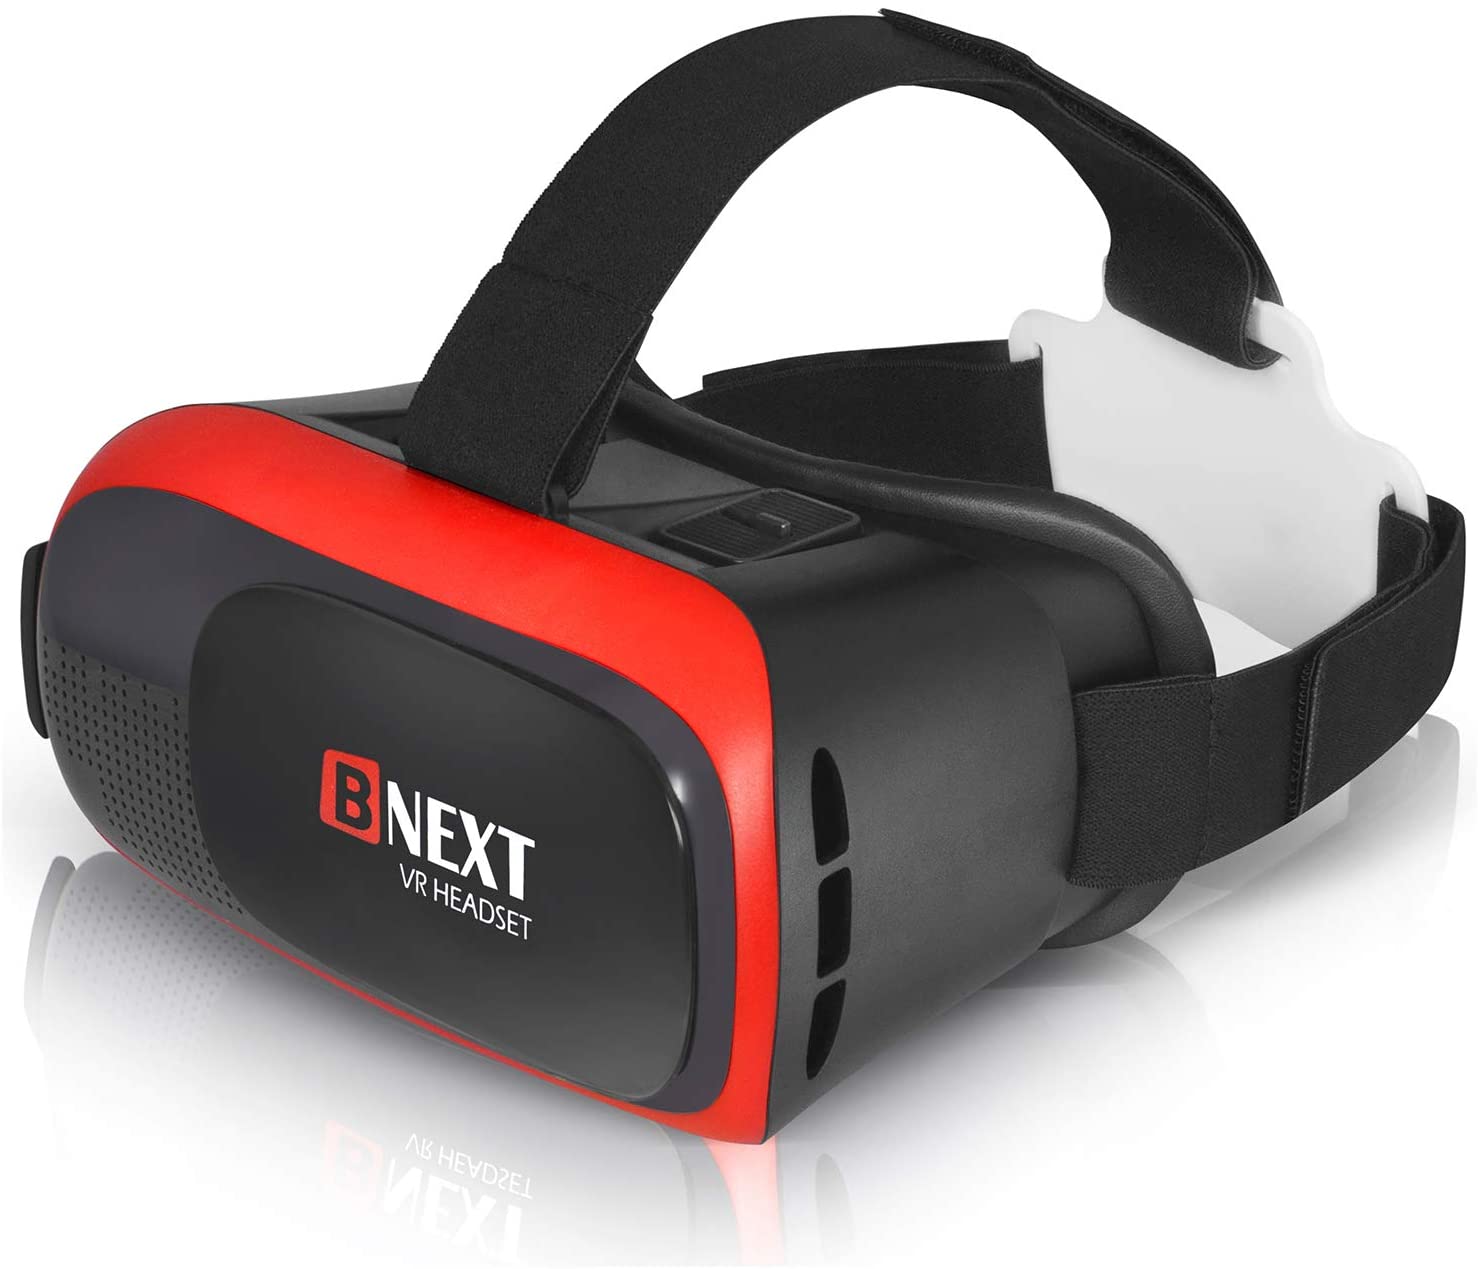 BNEXT iPhone & Android Conpatible VR Headset, Red